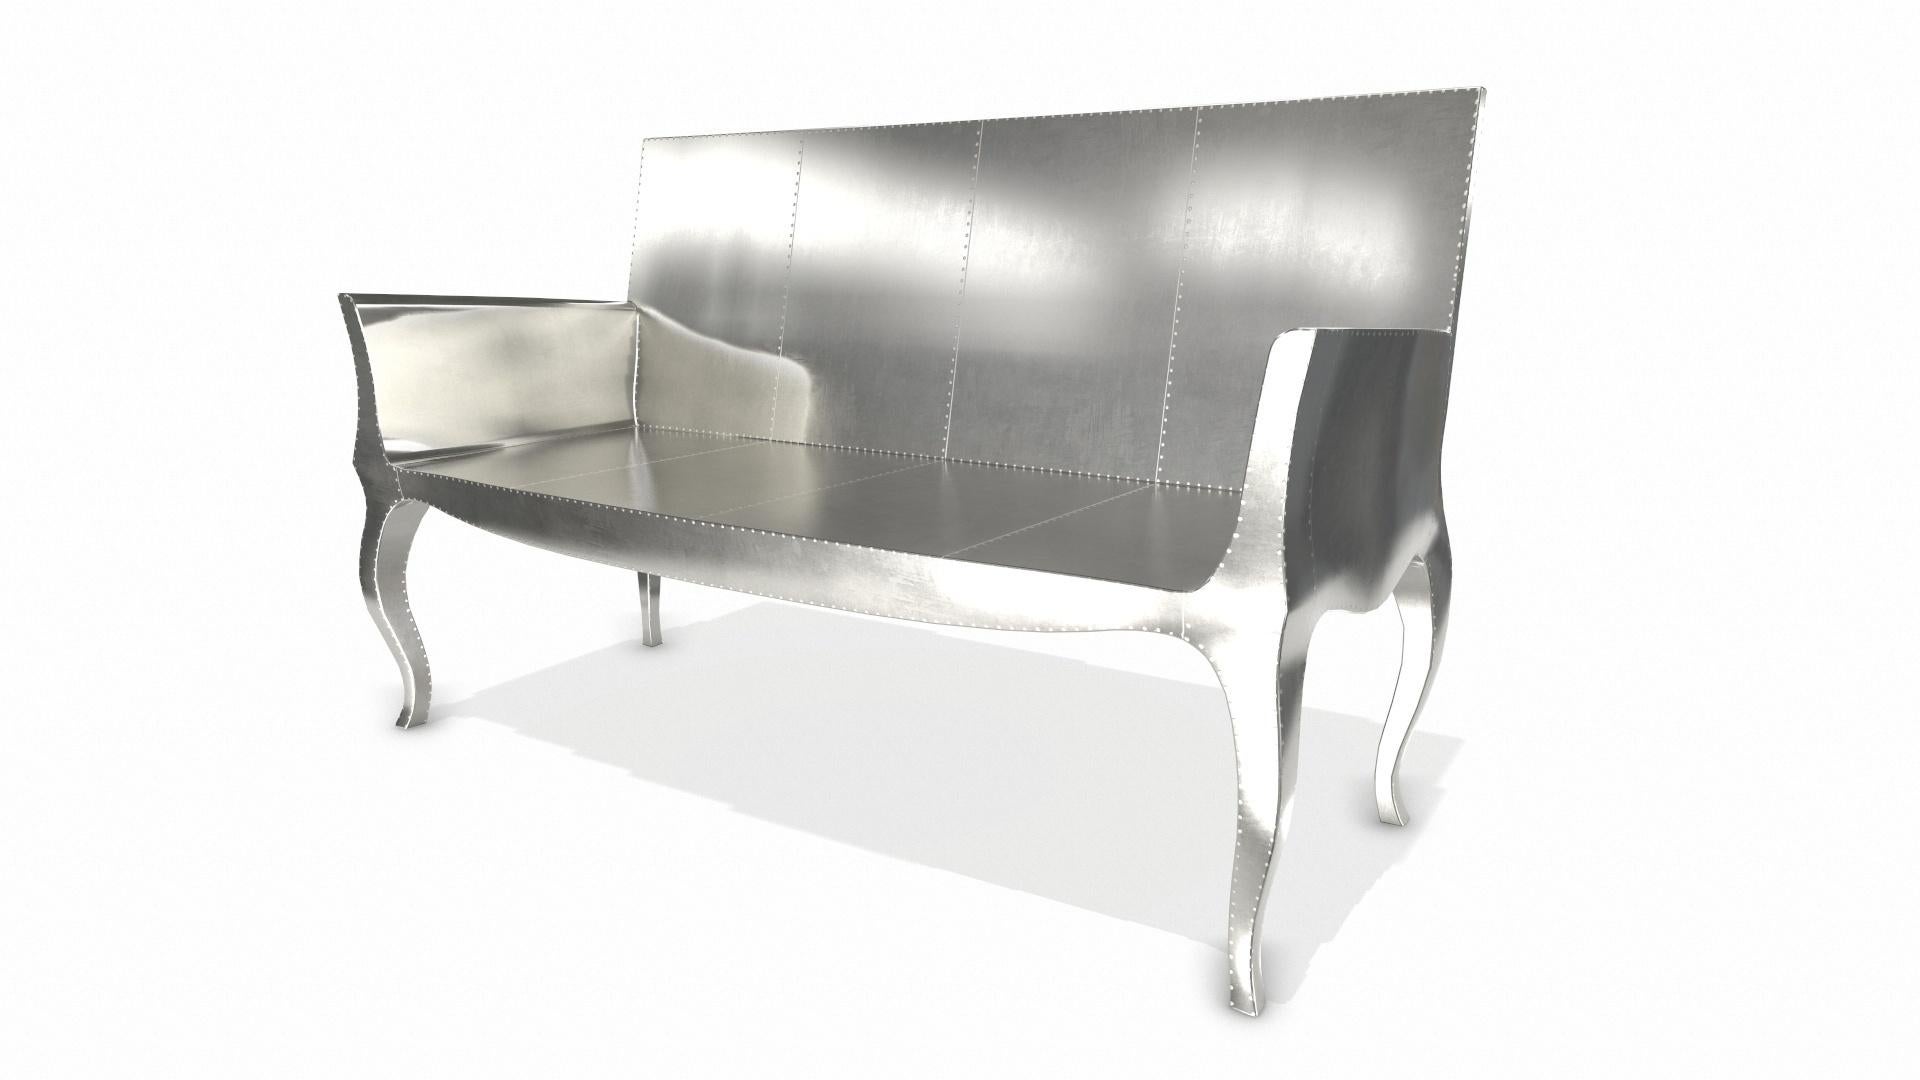 American Louise Settee Art Deco Lounge Chairs in Smooth White Bronze by Paul Mathieu For Sale